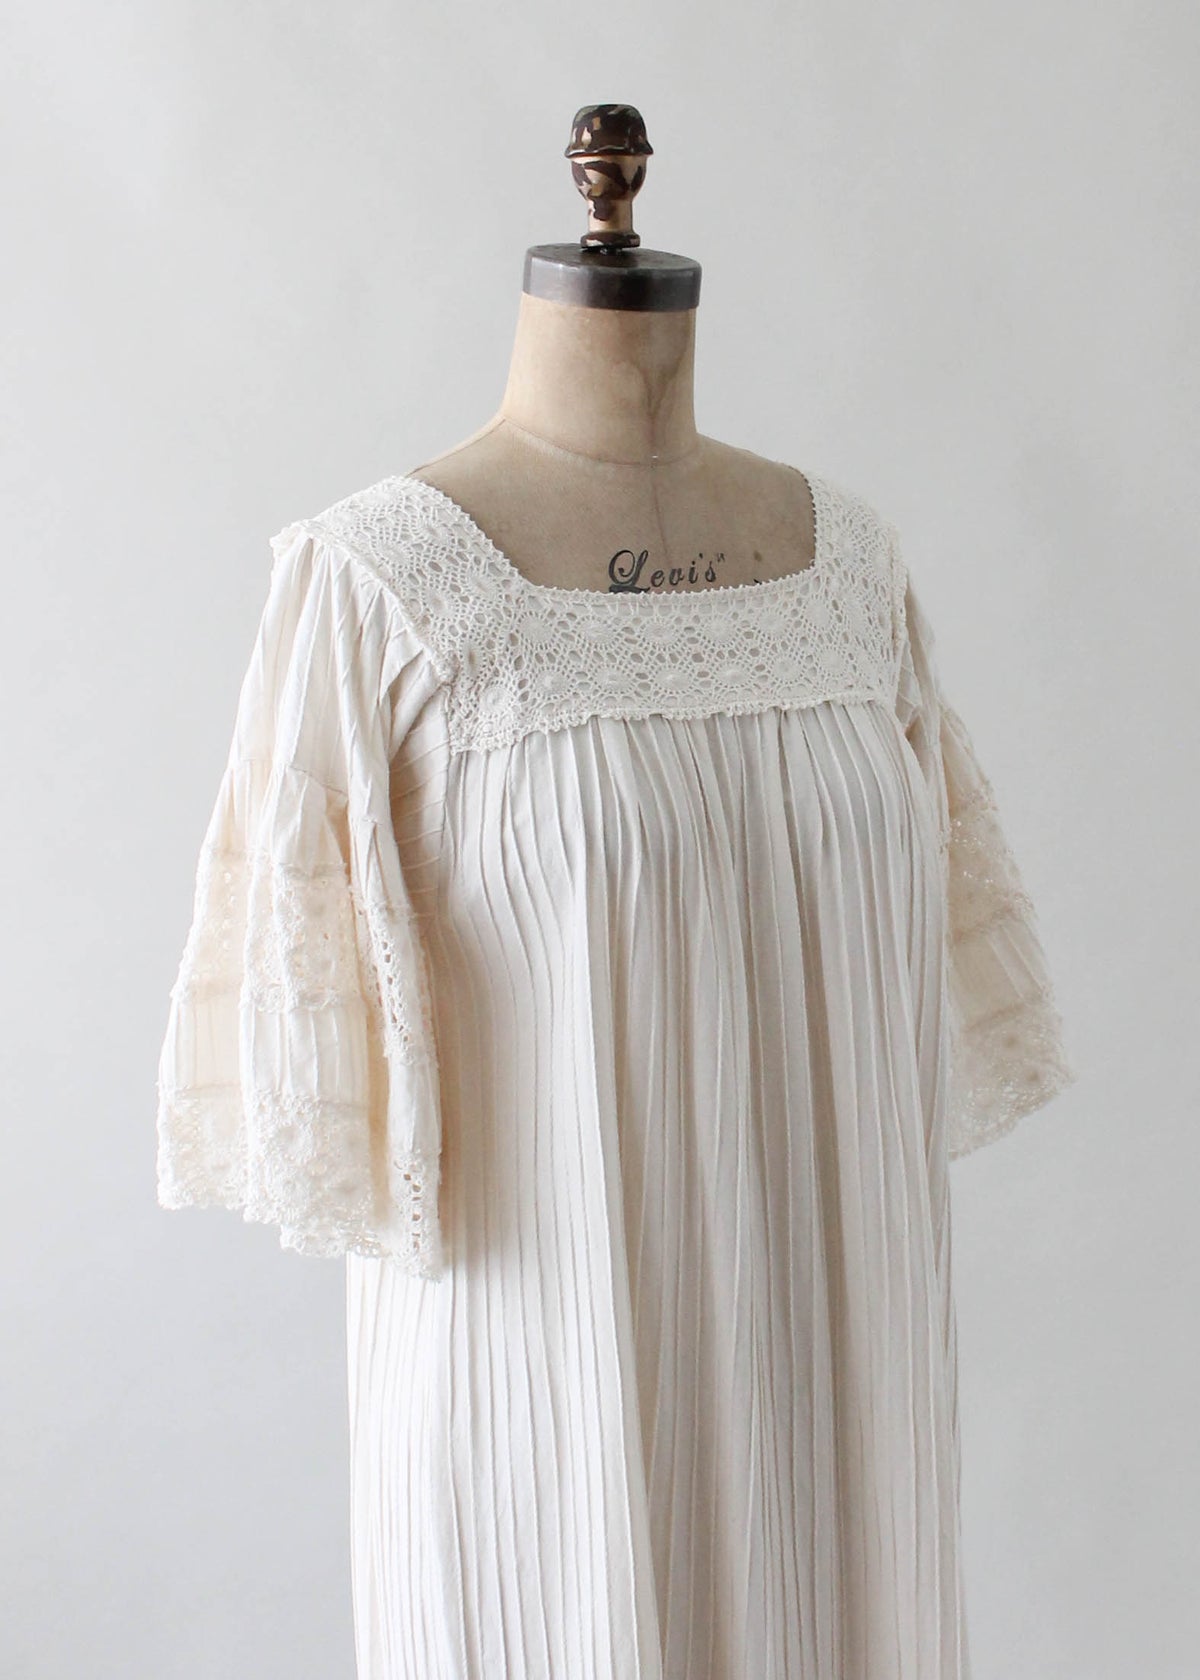 Vintage 1960s Muslin Cotton and Lace Mexican Dress - Raleigh Vintage